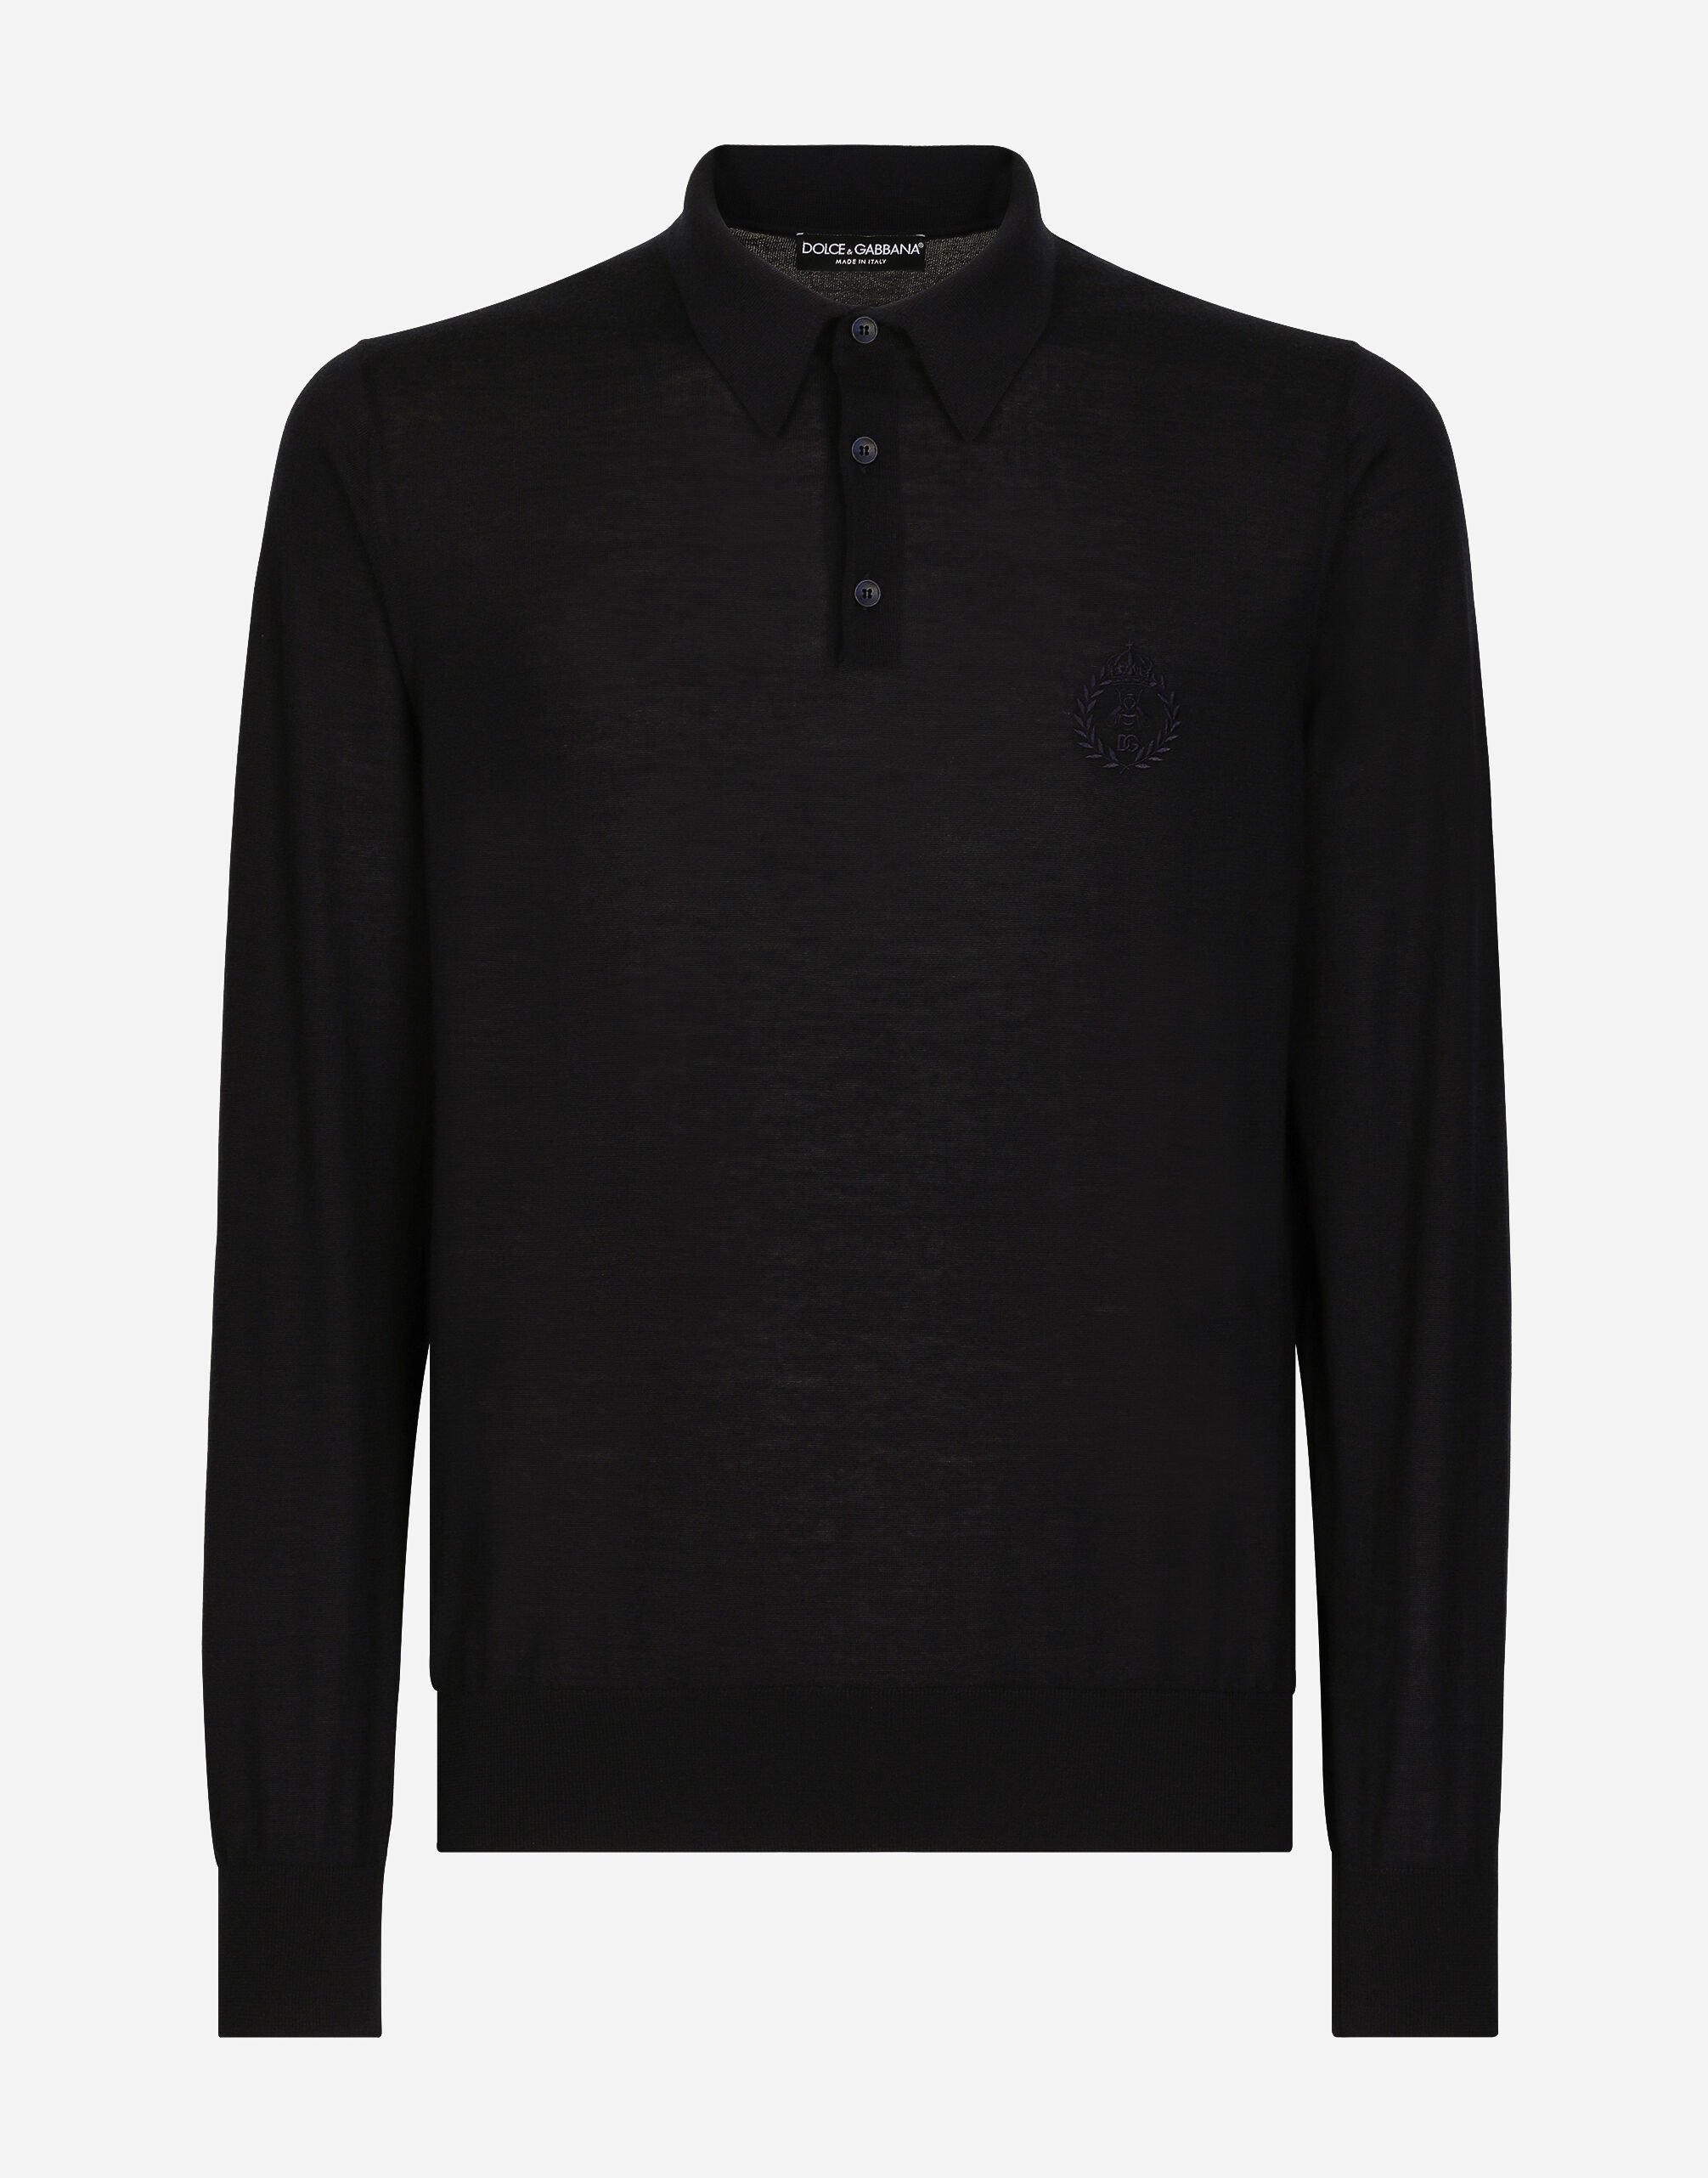 Dolce & Gabbana Cashmere polo-style sweater with DG logo embroidery Grey GXP80TJFMK7